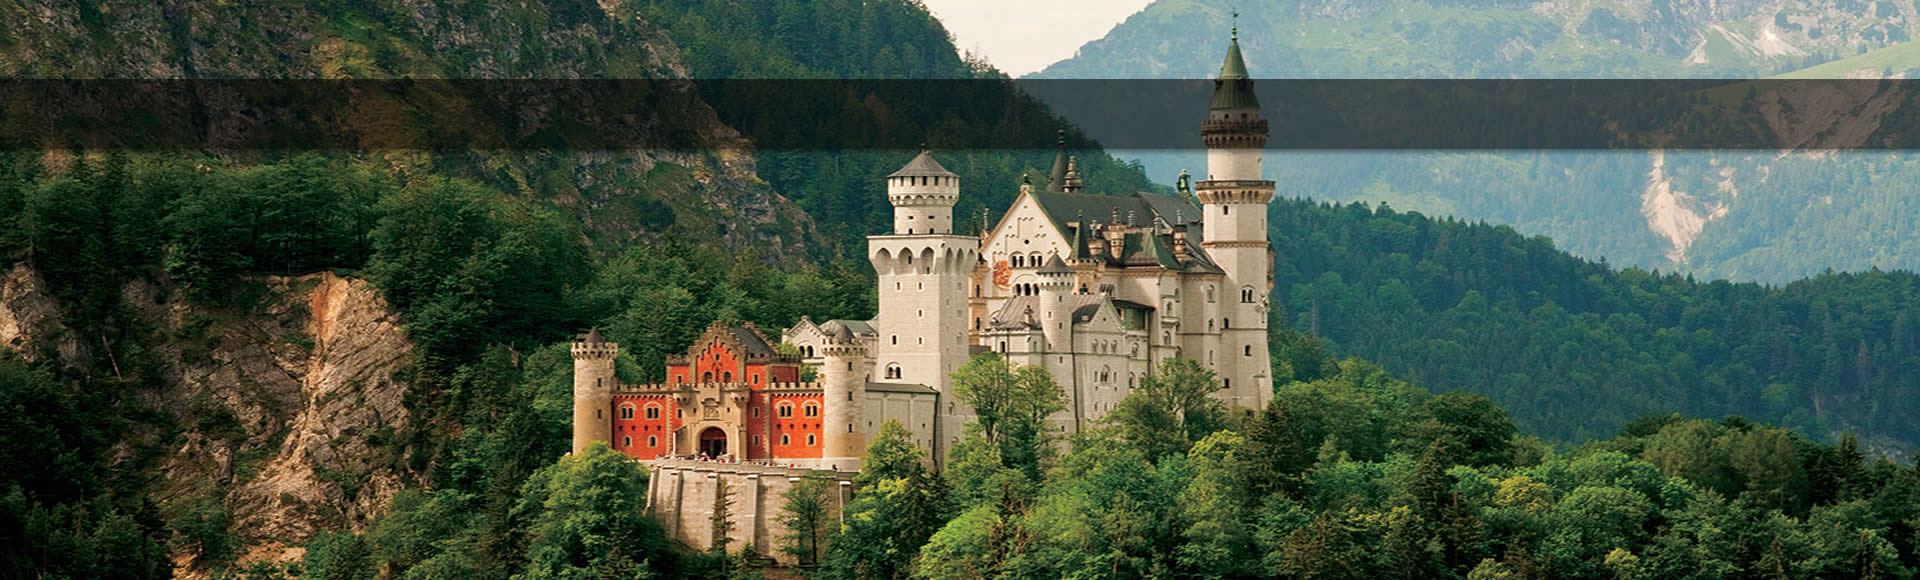 EXPERIENCE GERMANY LIKE NO ONE ELSE CAN SHOW YOU